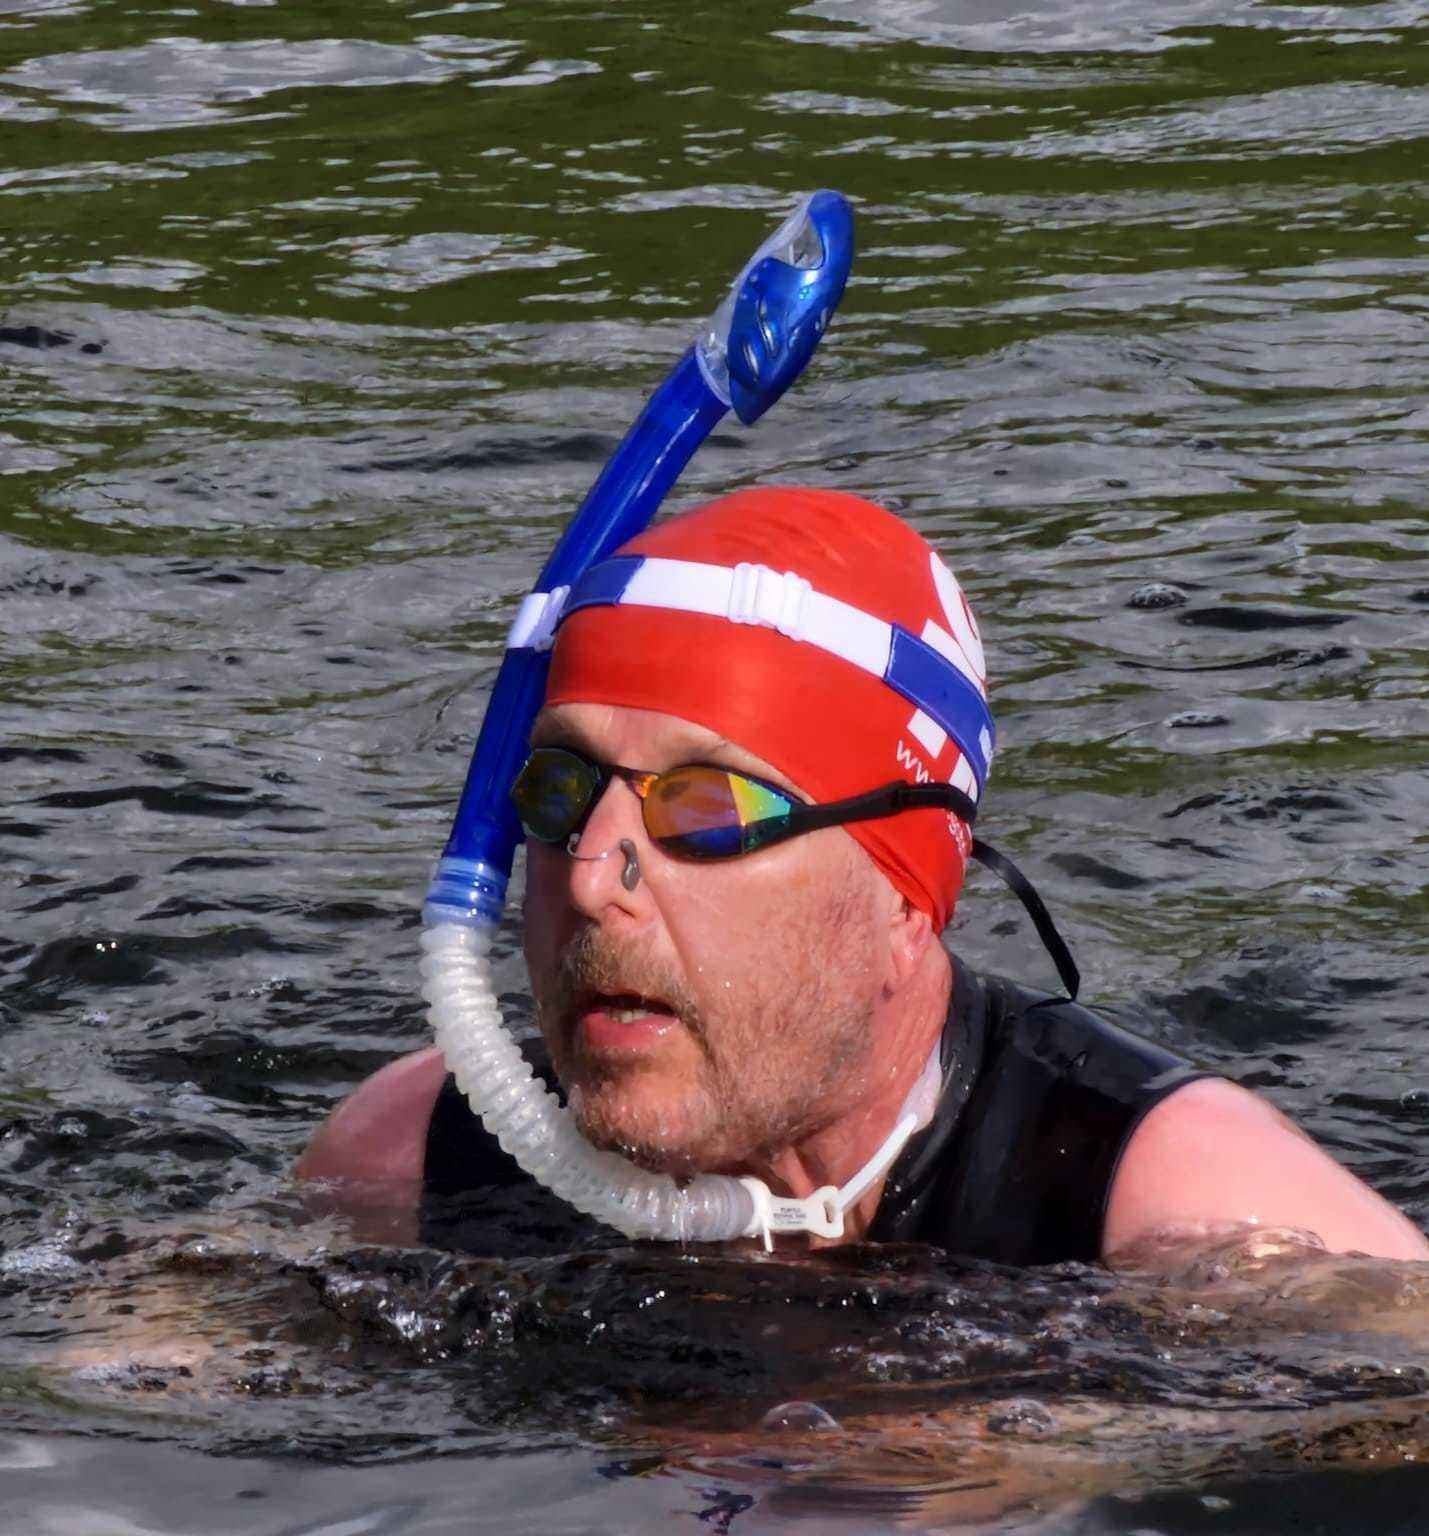 Richard Andrews open water swimming with his specially fitted snorkel